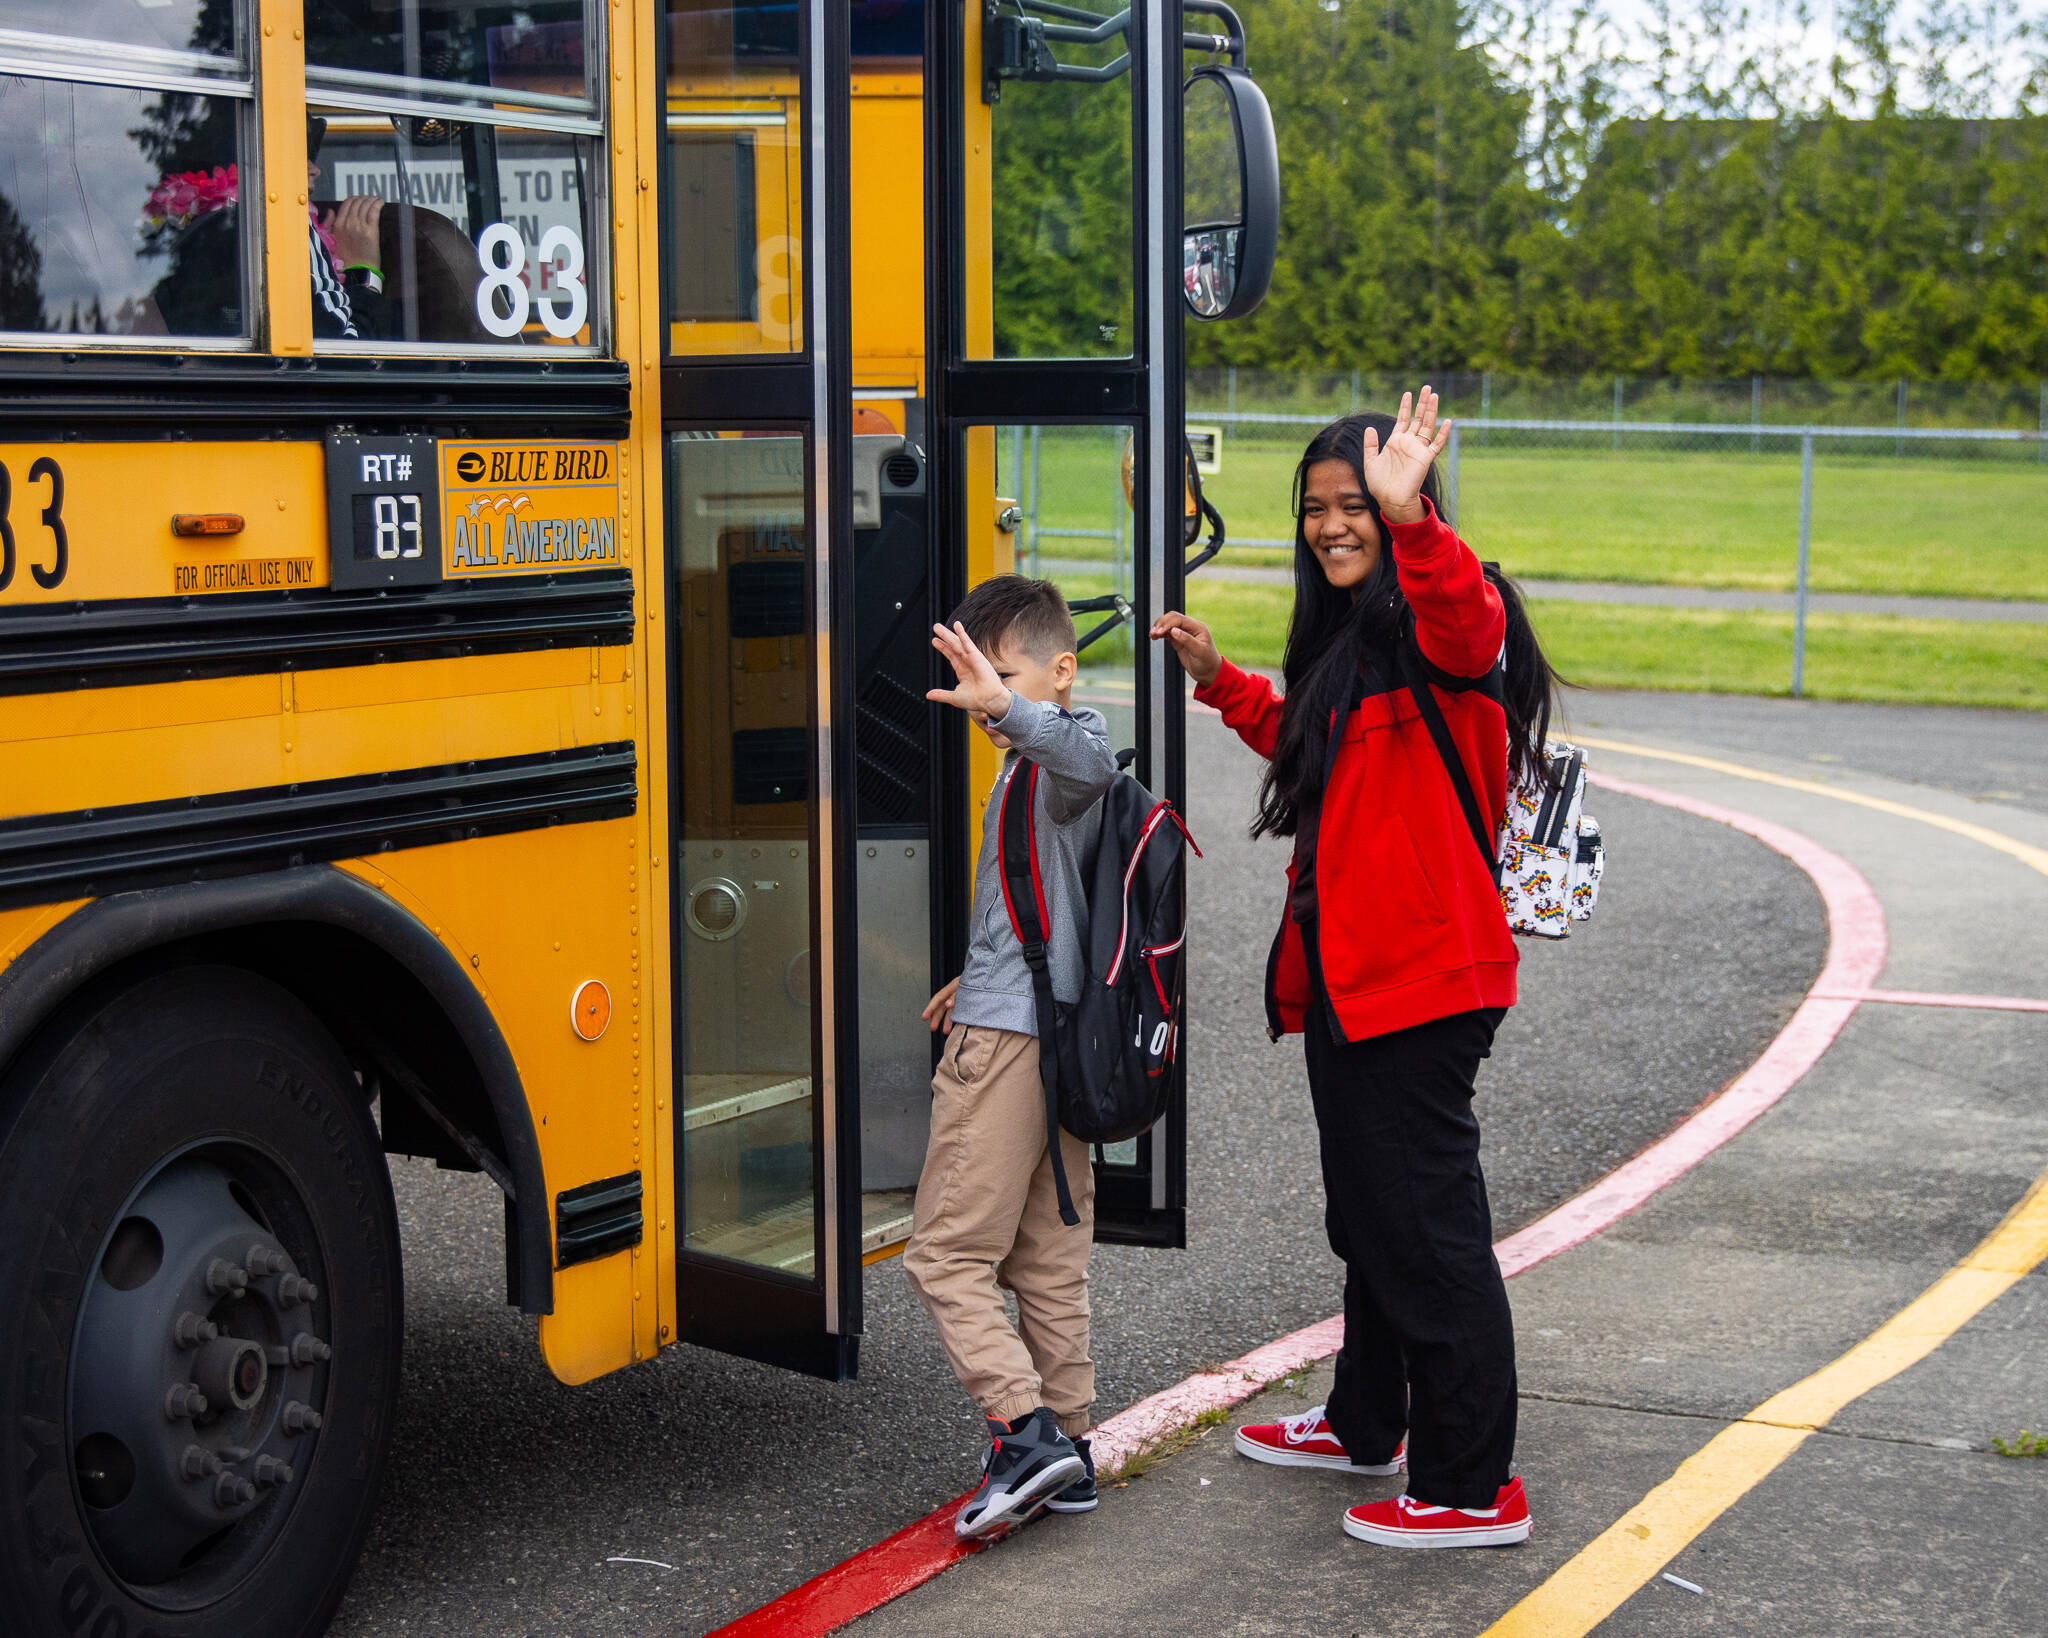 Students depart June 20 on the final day of school in the Kent School District. COURTESY PHOTO, Kent School District